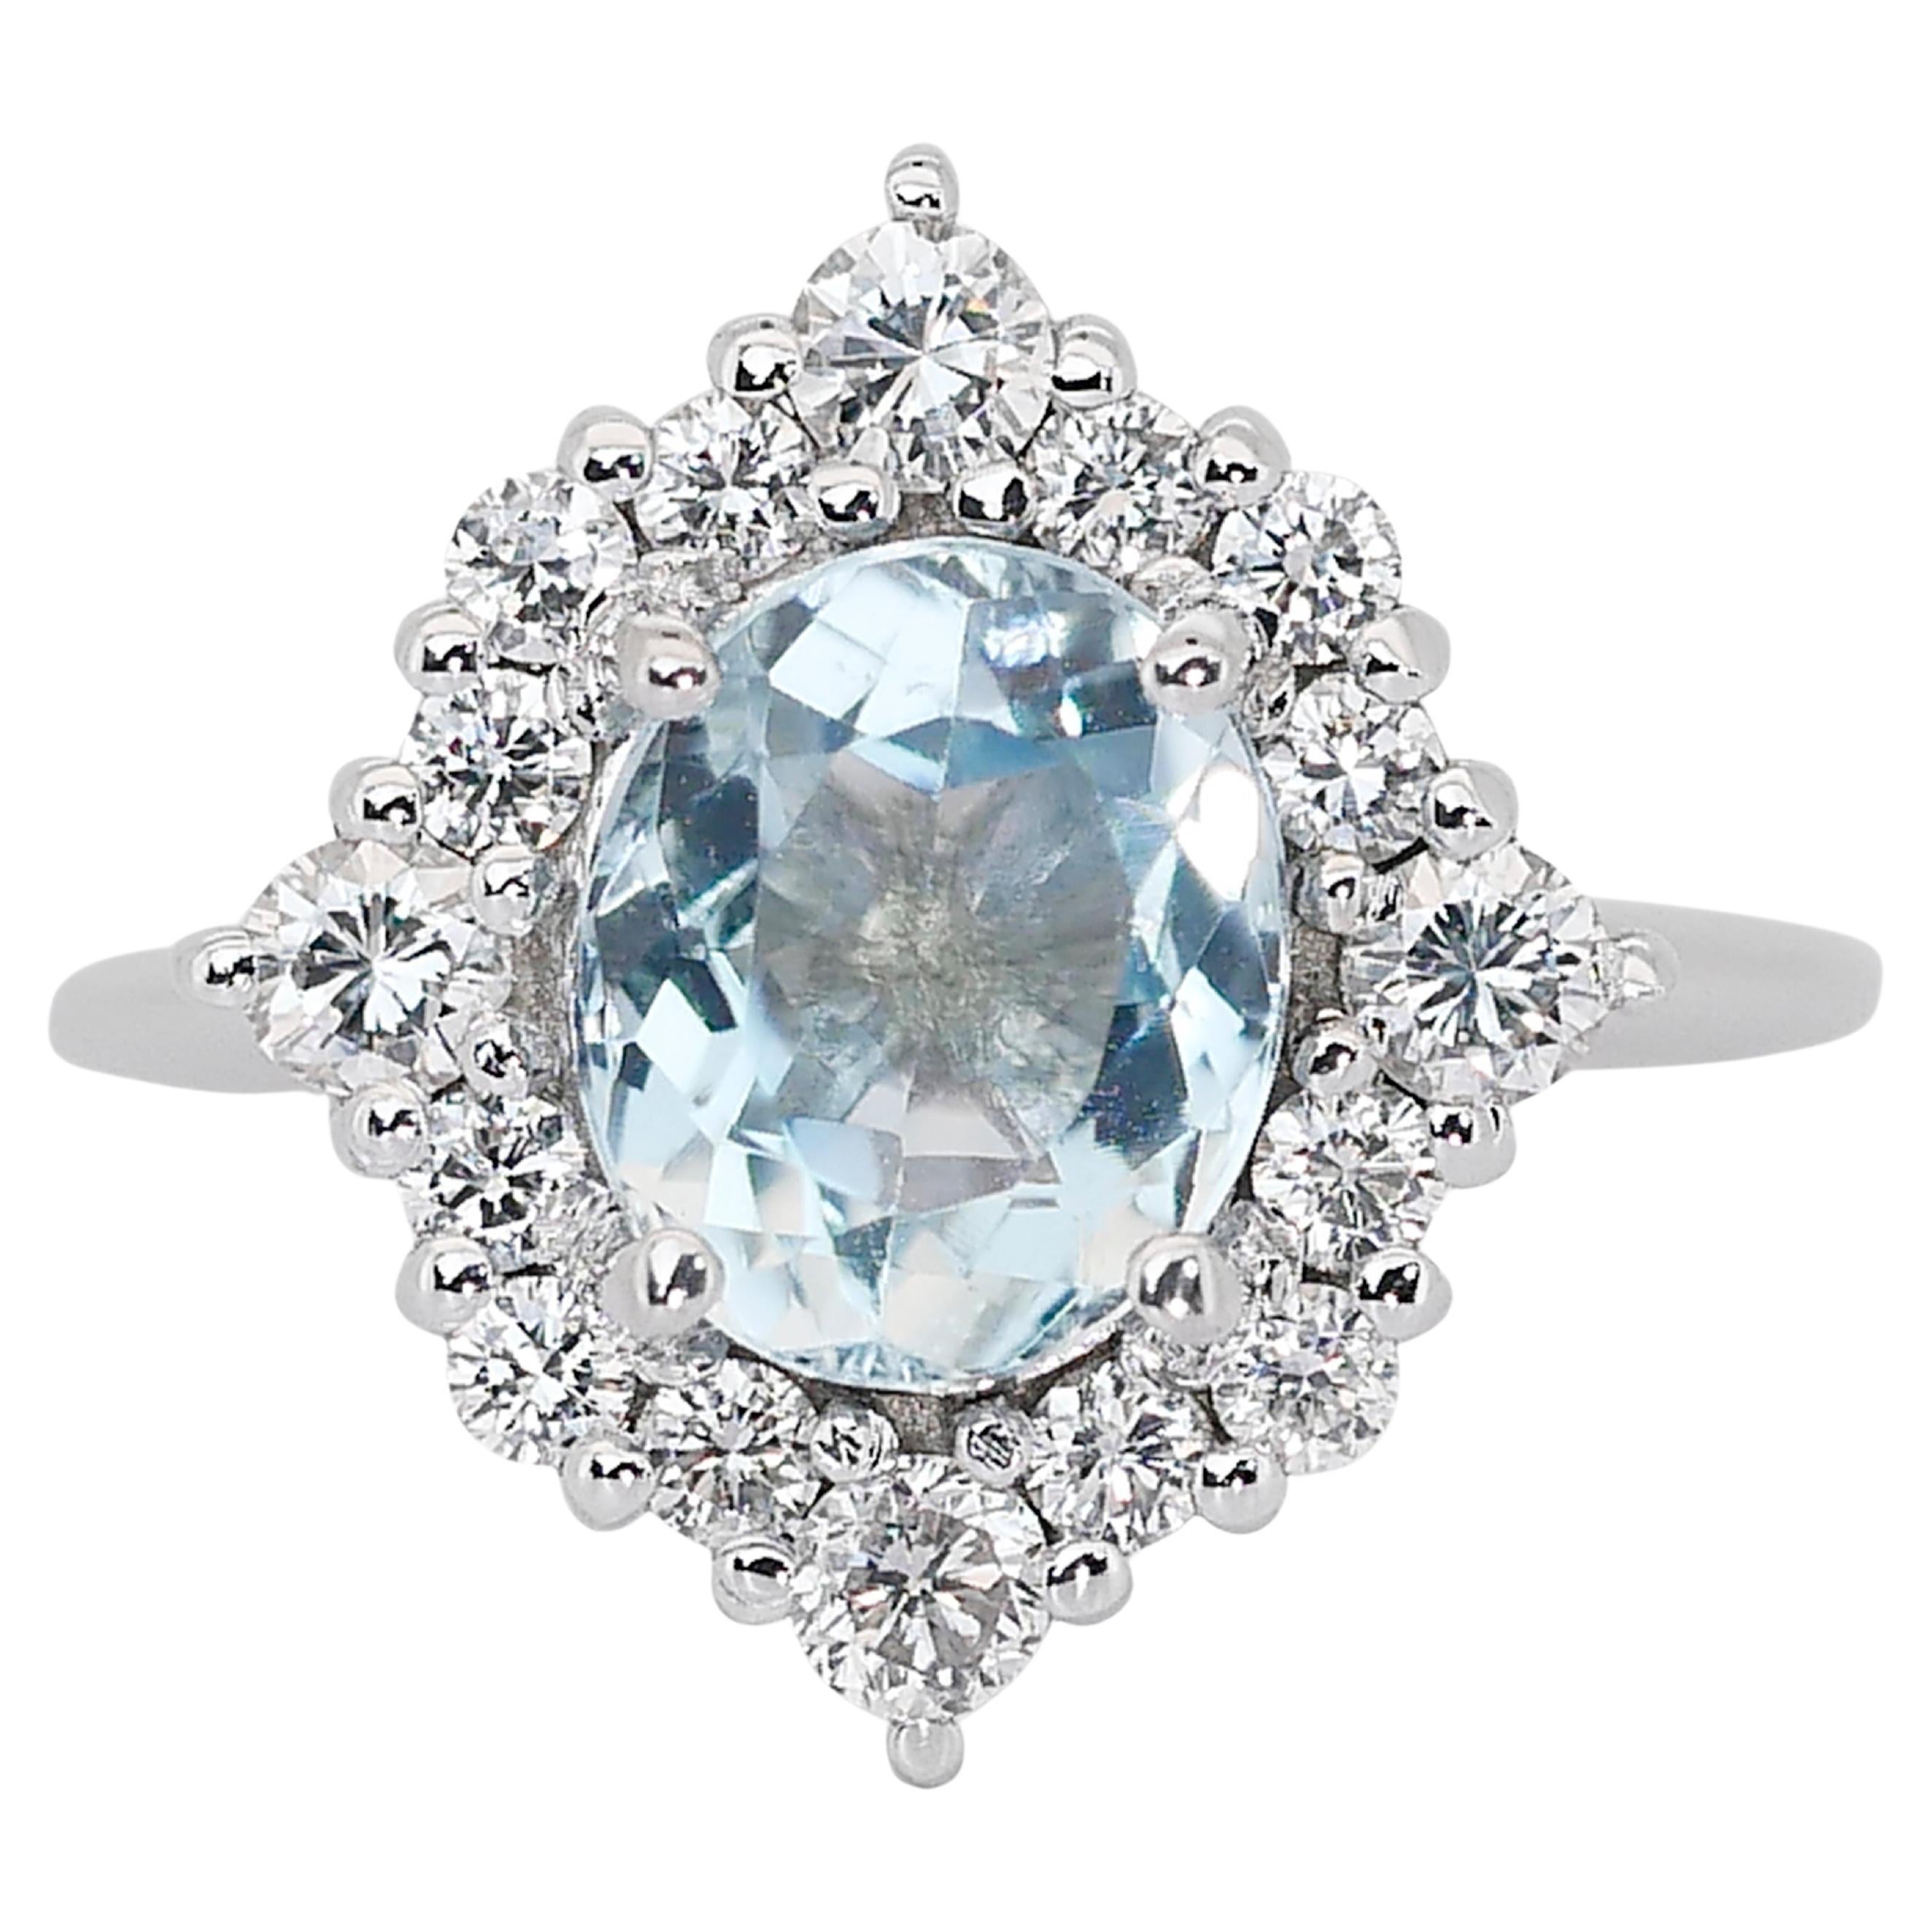 Magnificent 18K White Gold Beryl & Natural Diamond Ring w/ 2.60ct- IGI Certified For Sale